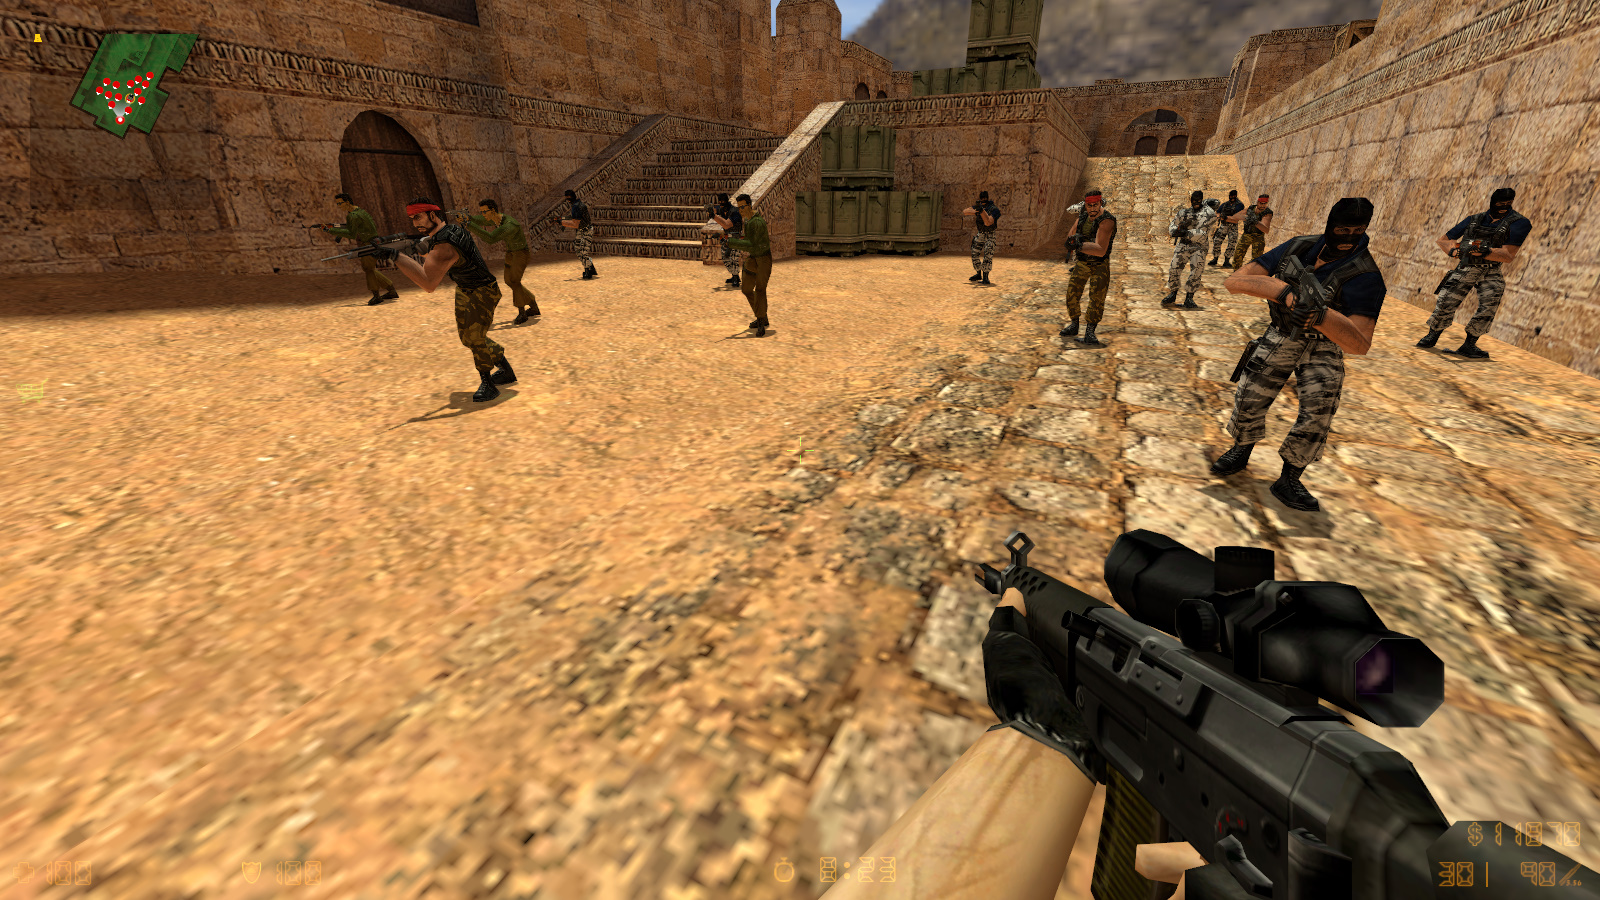 counter strike source 2 release date